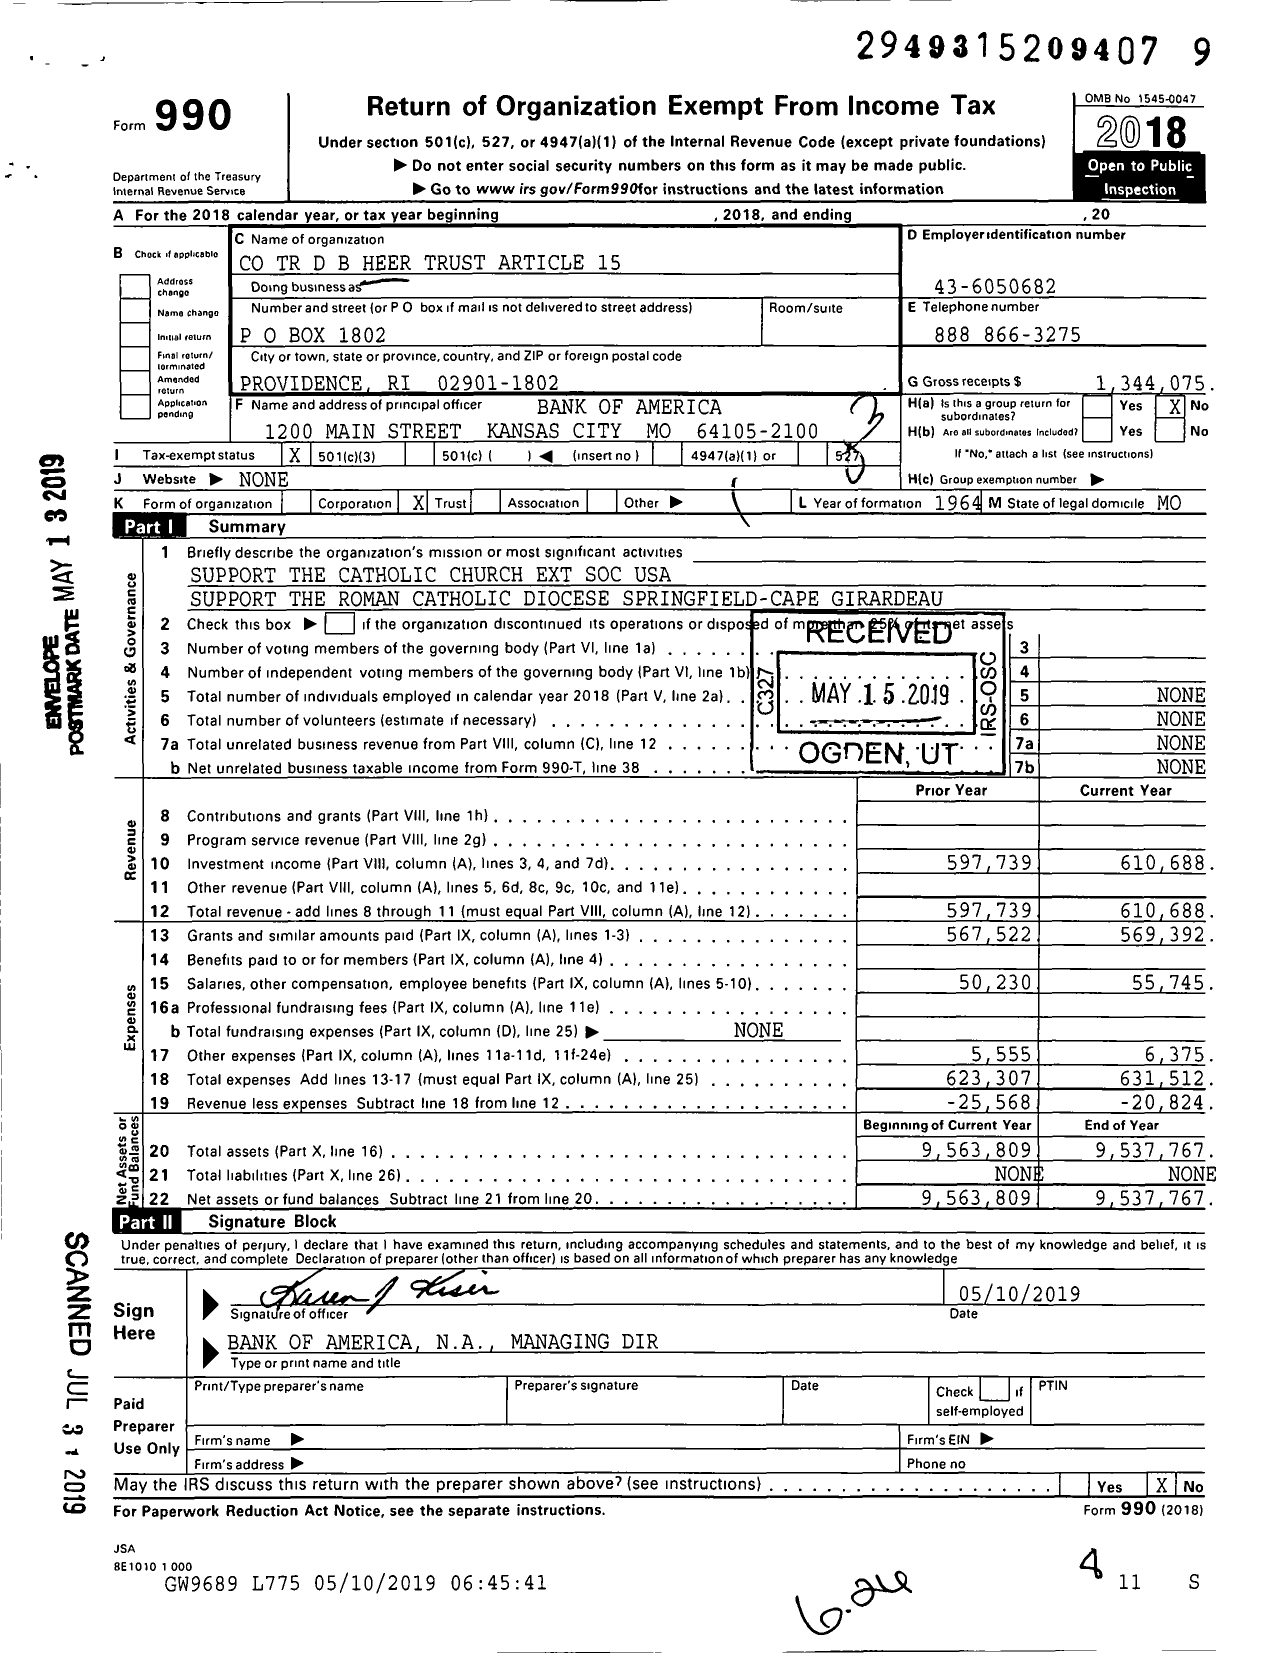 Image of first page of 2018 Form 990 for Dorsey B Heer TR 15 of Will